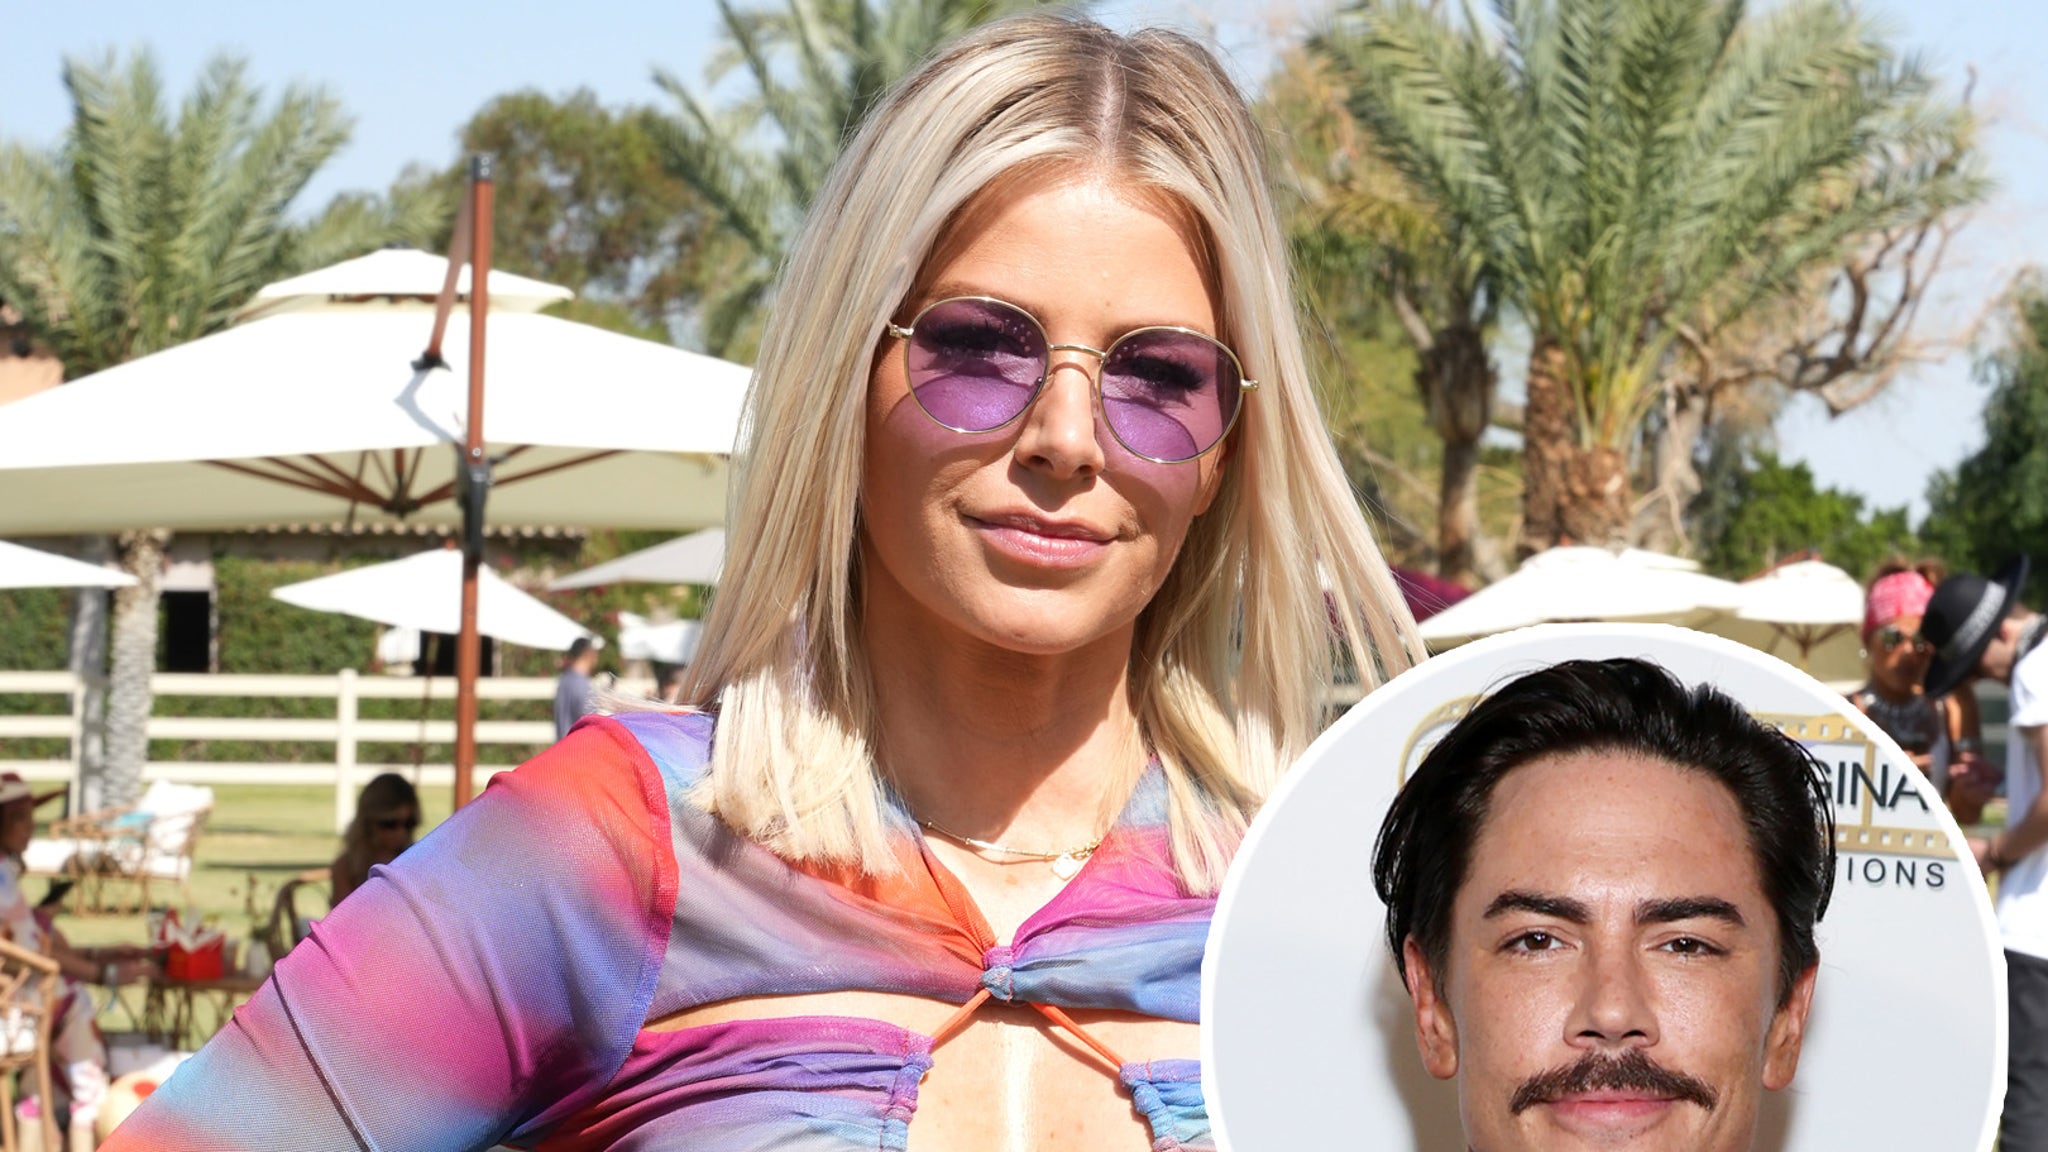 Ariana Madix Is Feeling ‘amazing’ At Coachella After Tom Sandoval Split Cheating Scandal